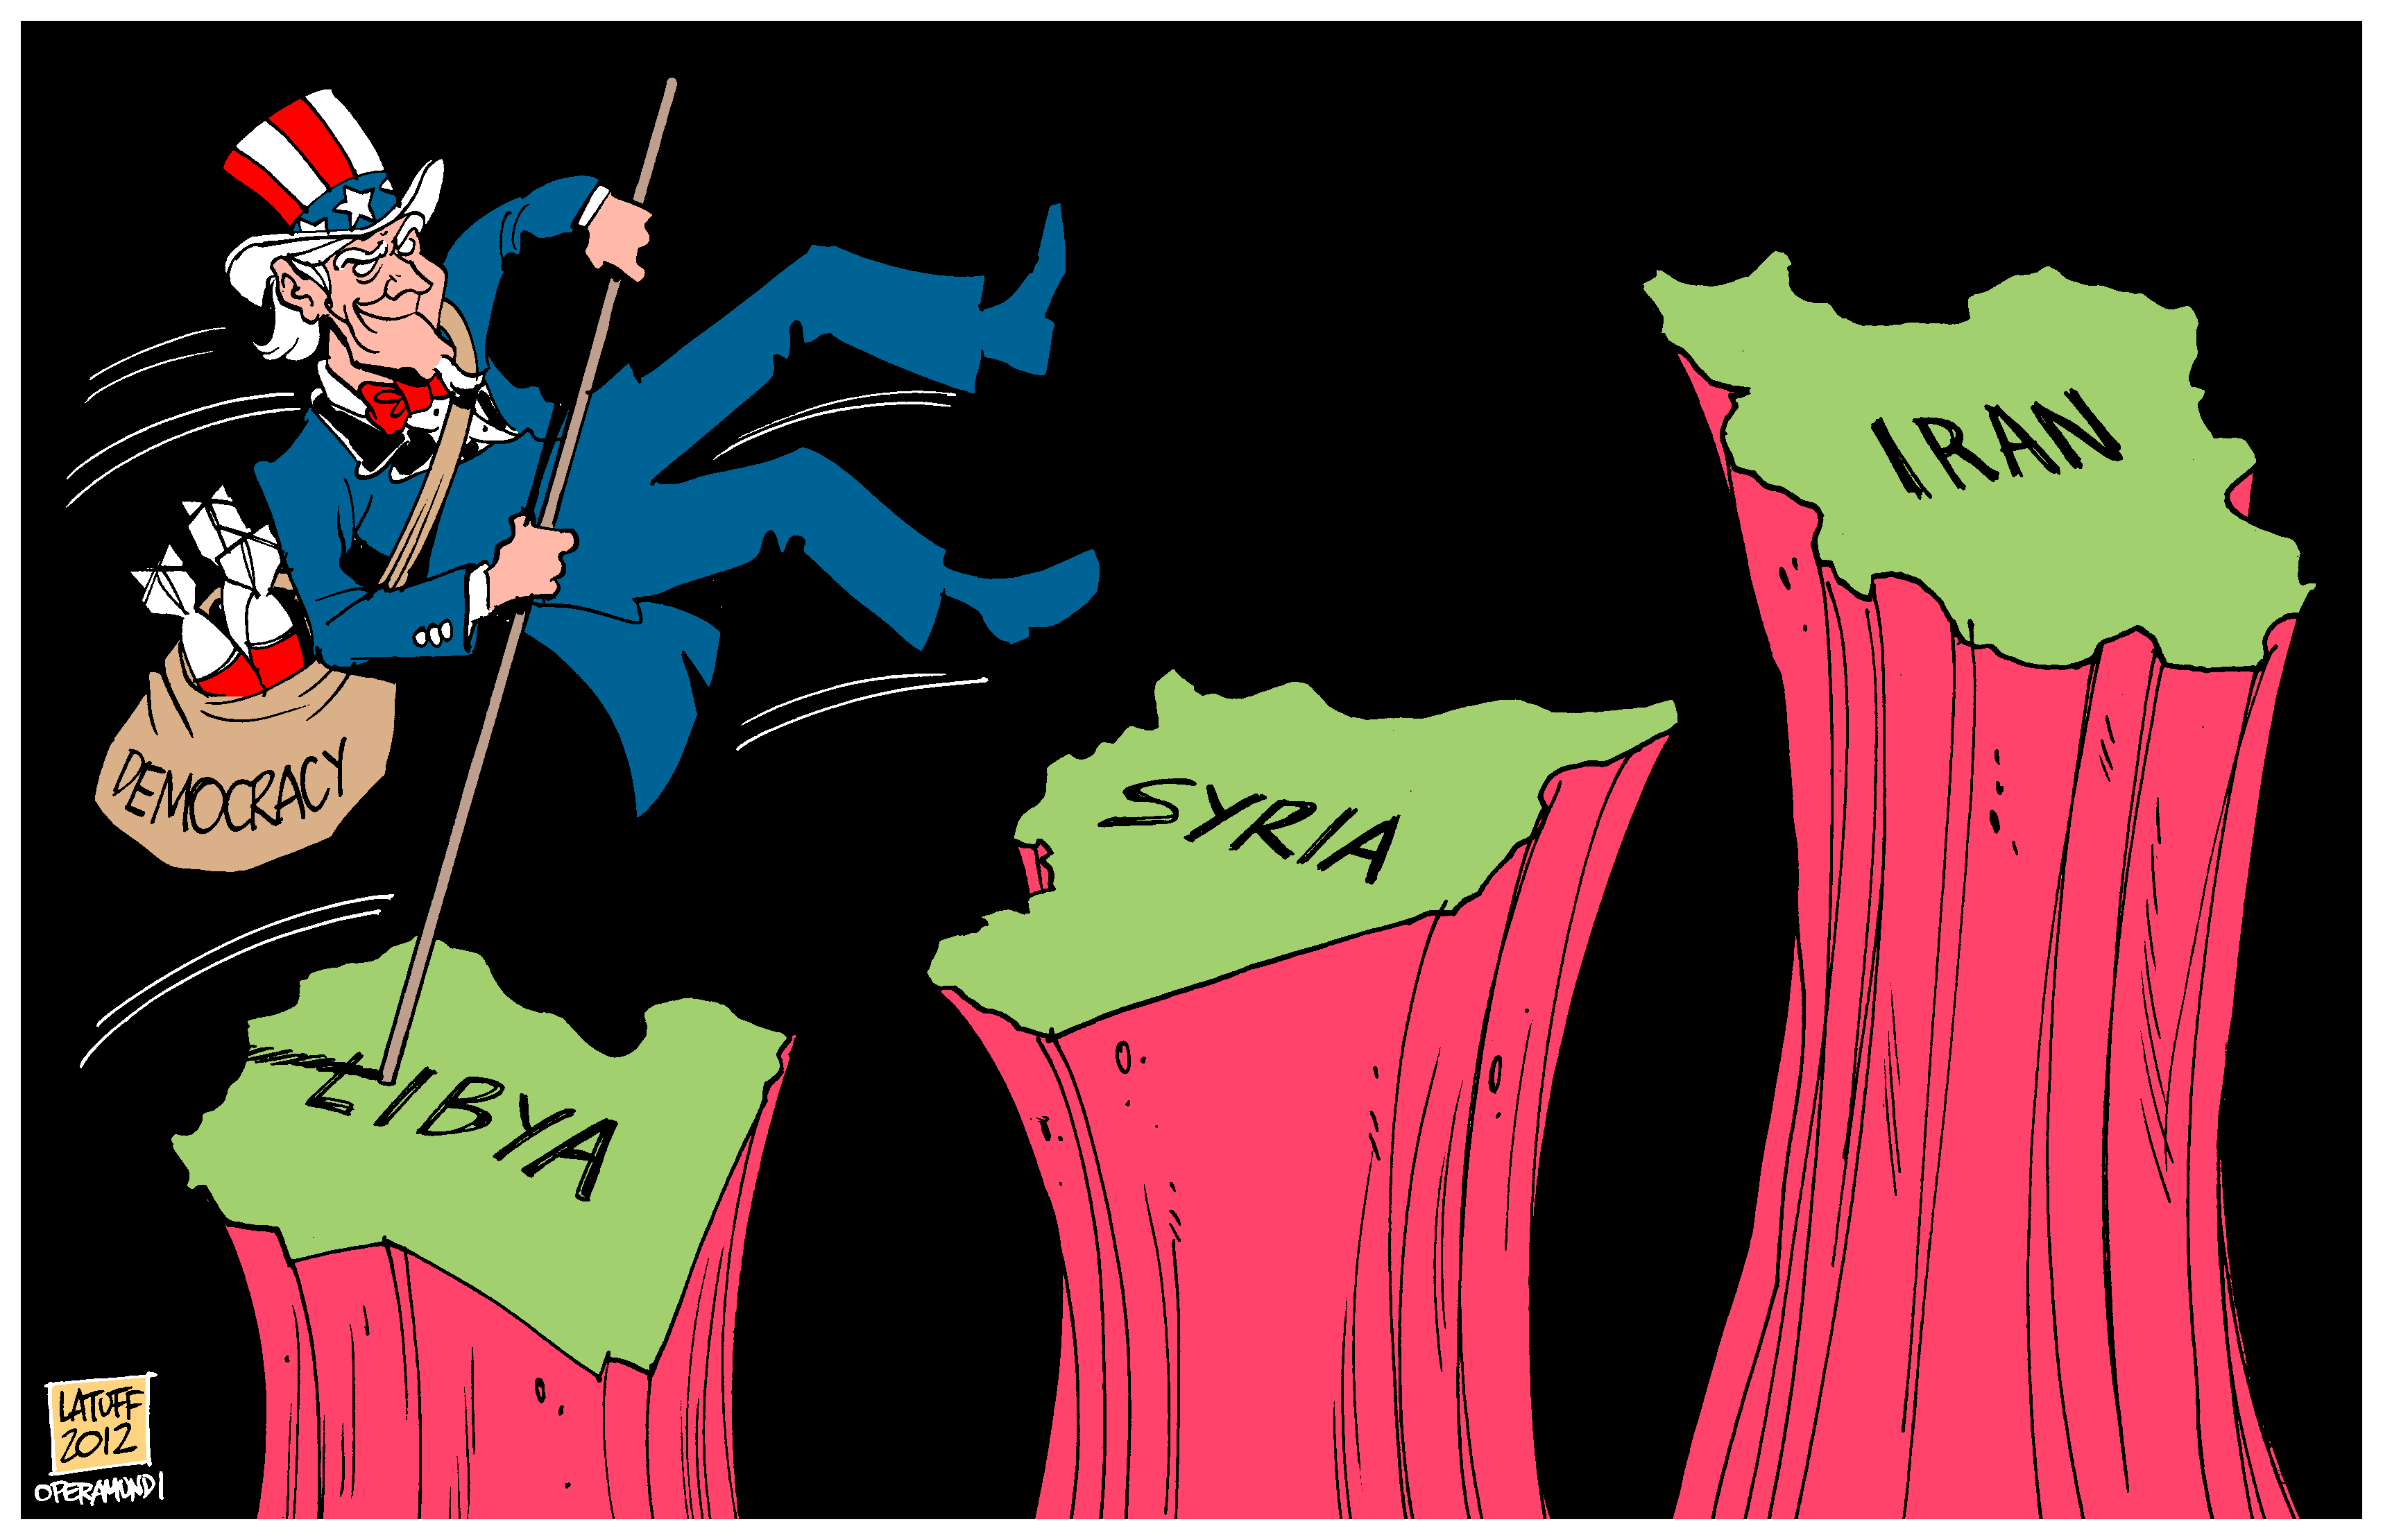 Trying to Pole-Vault from Libya to Syria to Iran